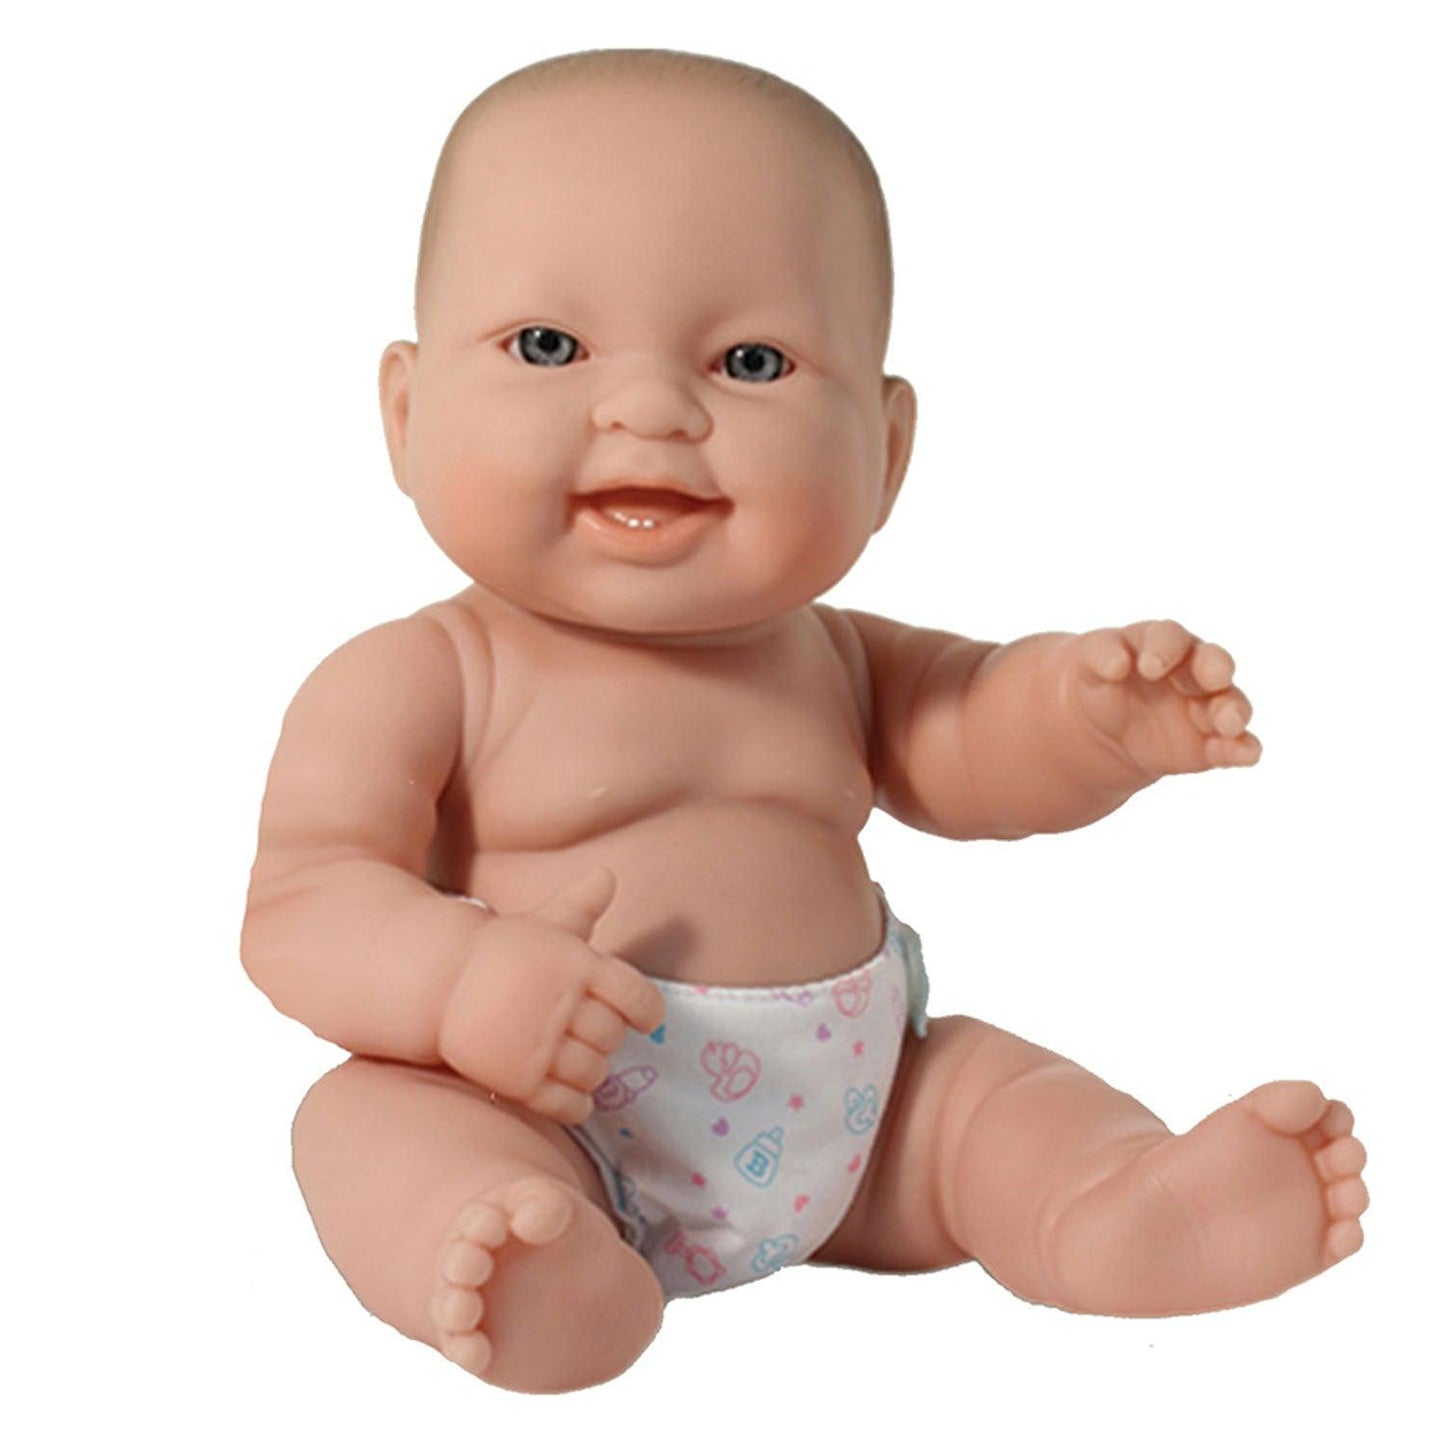 Lots to Love® Babies, 10" Size, Caucasian Baby - Loomini